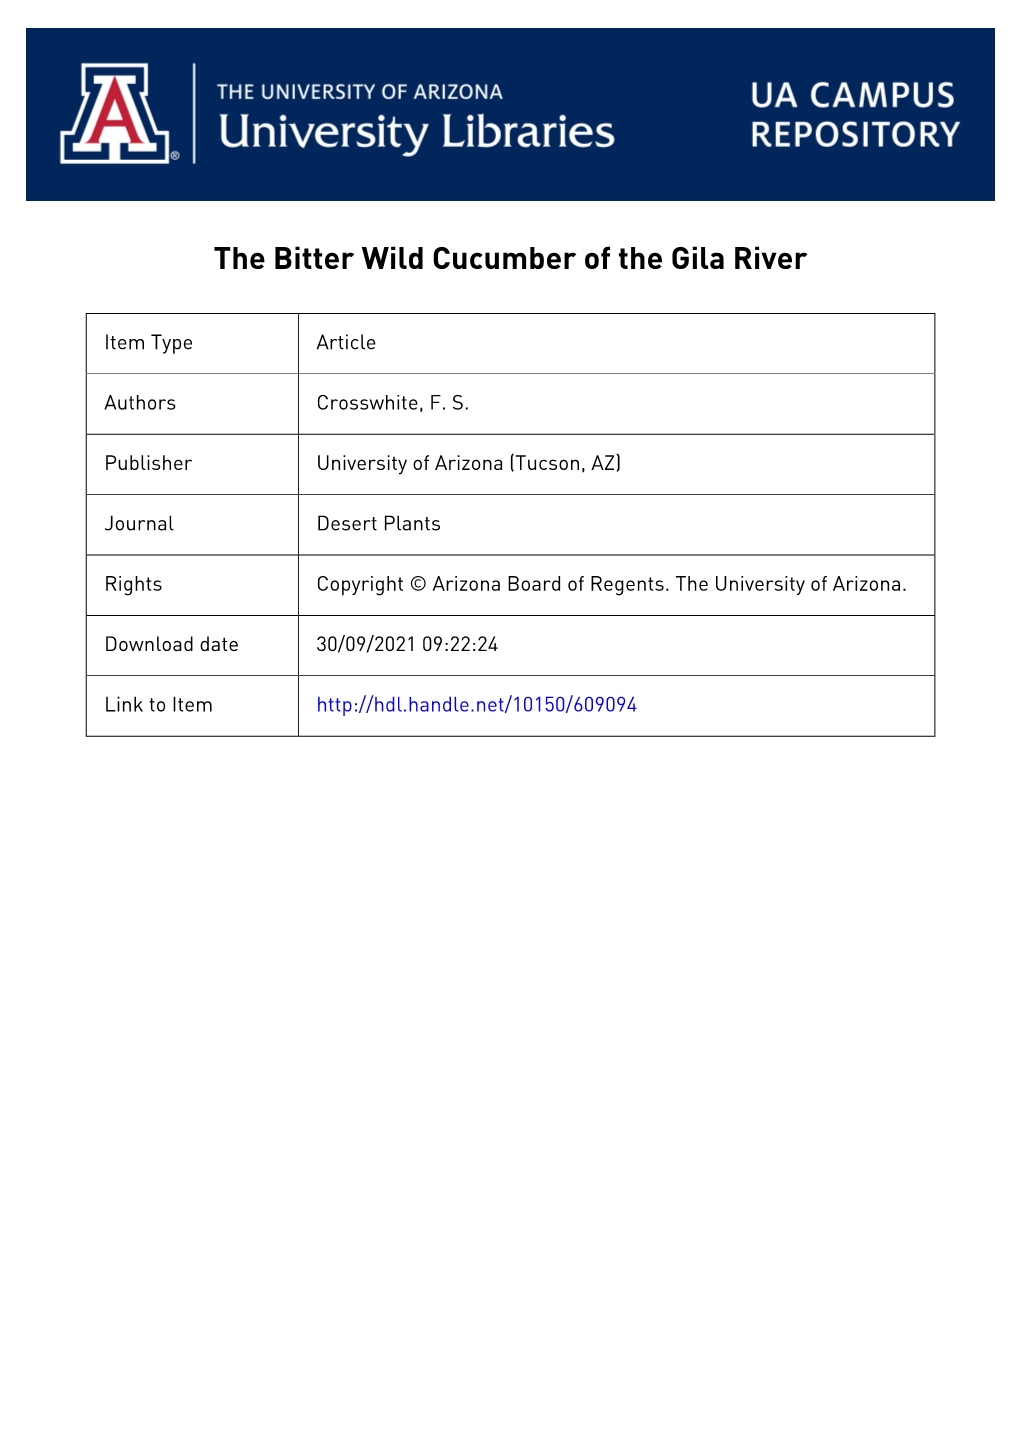 The Bitter Wild Cucumber of the Gila River